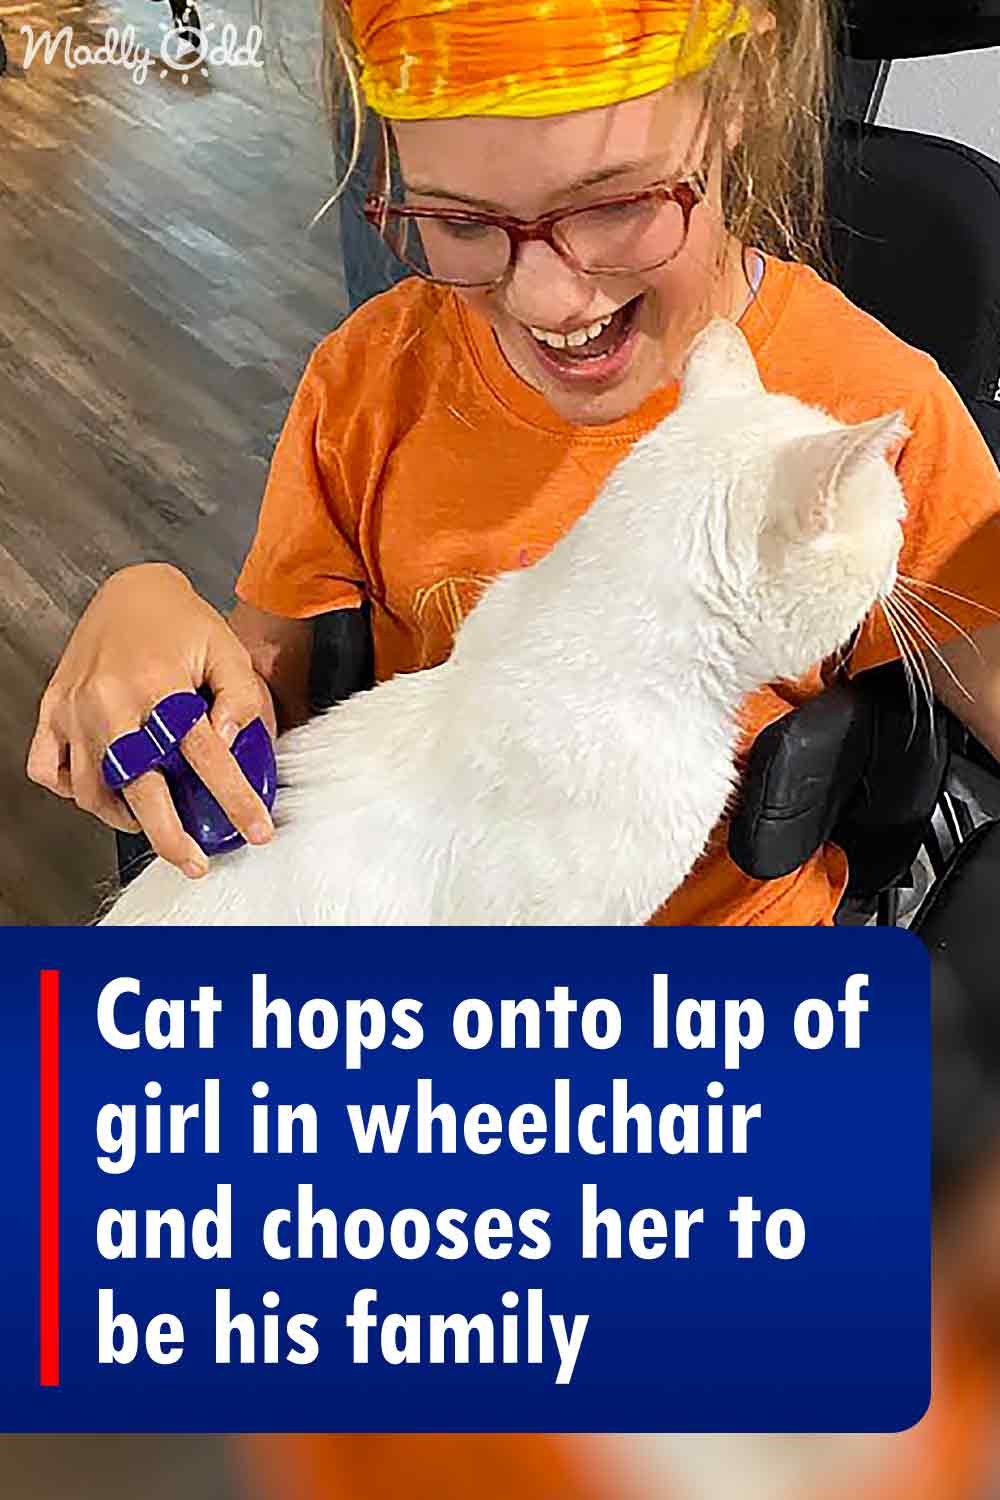 Cat hops onto lap of girl in wheelchair and chooses her to be his family